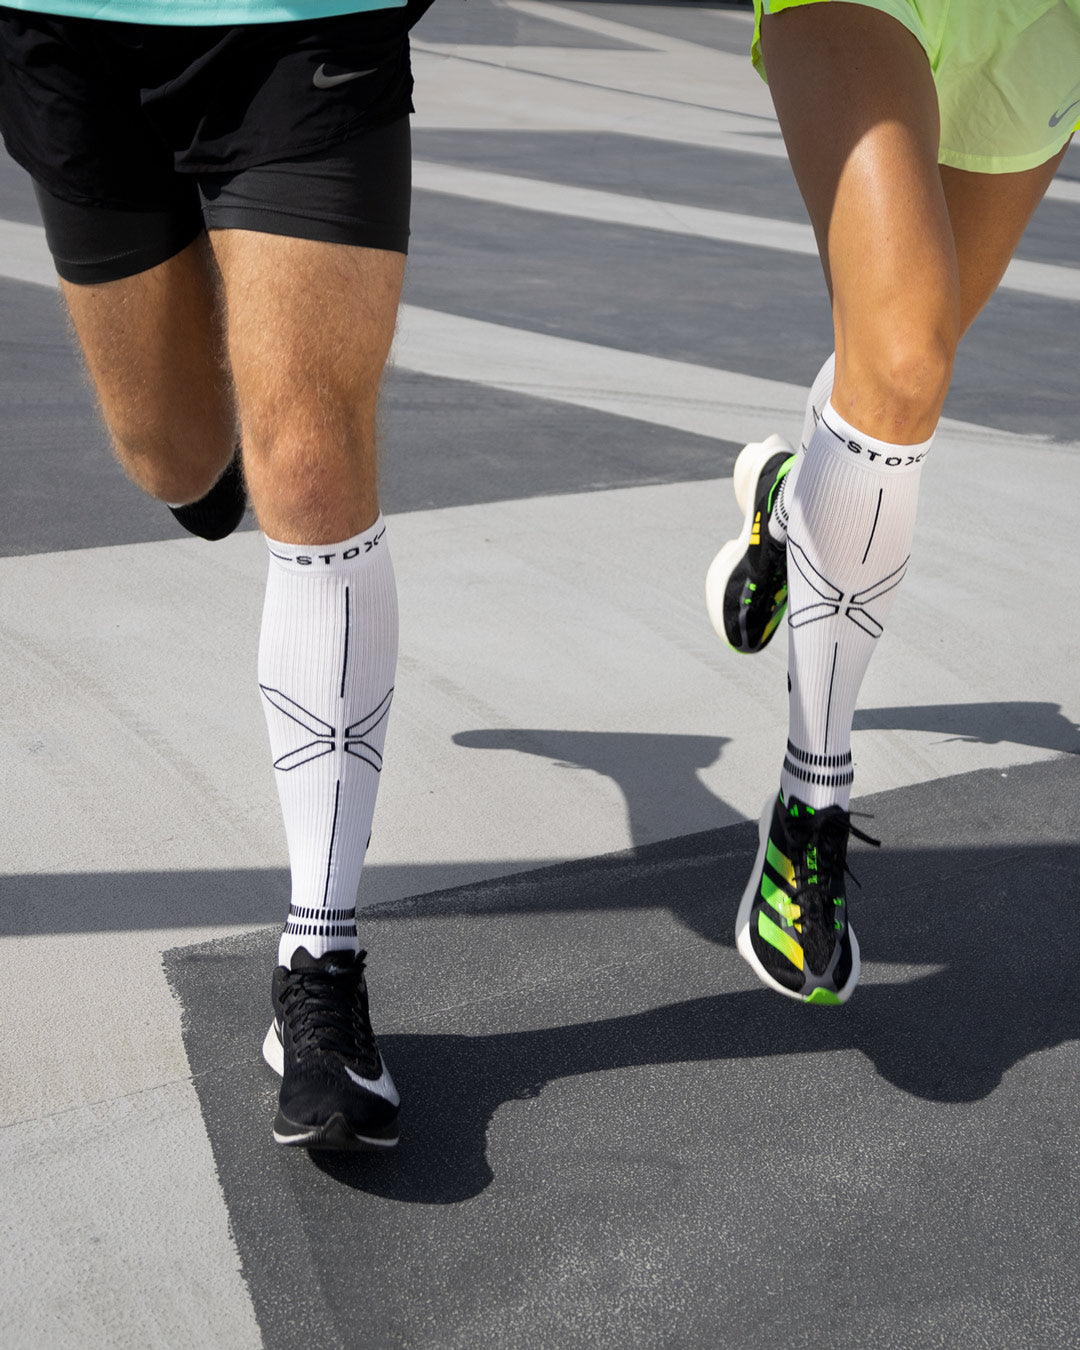 When and how long should you wear compression socks?